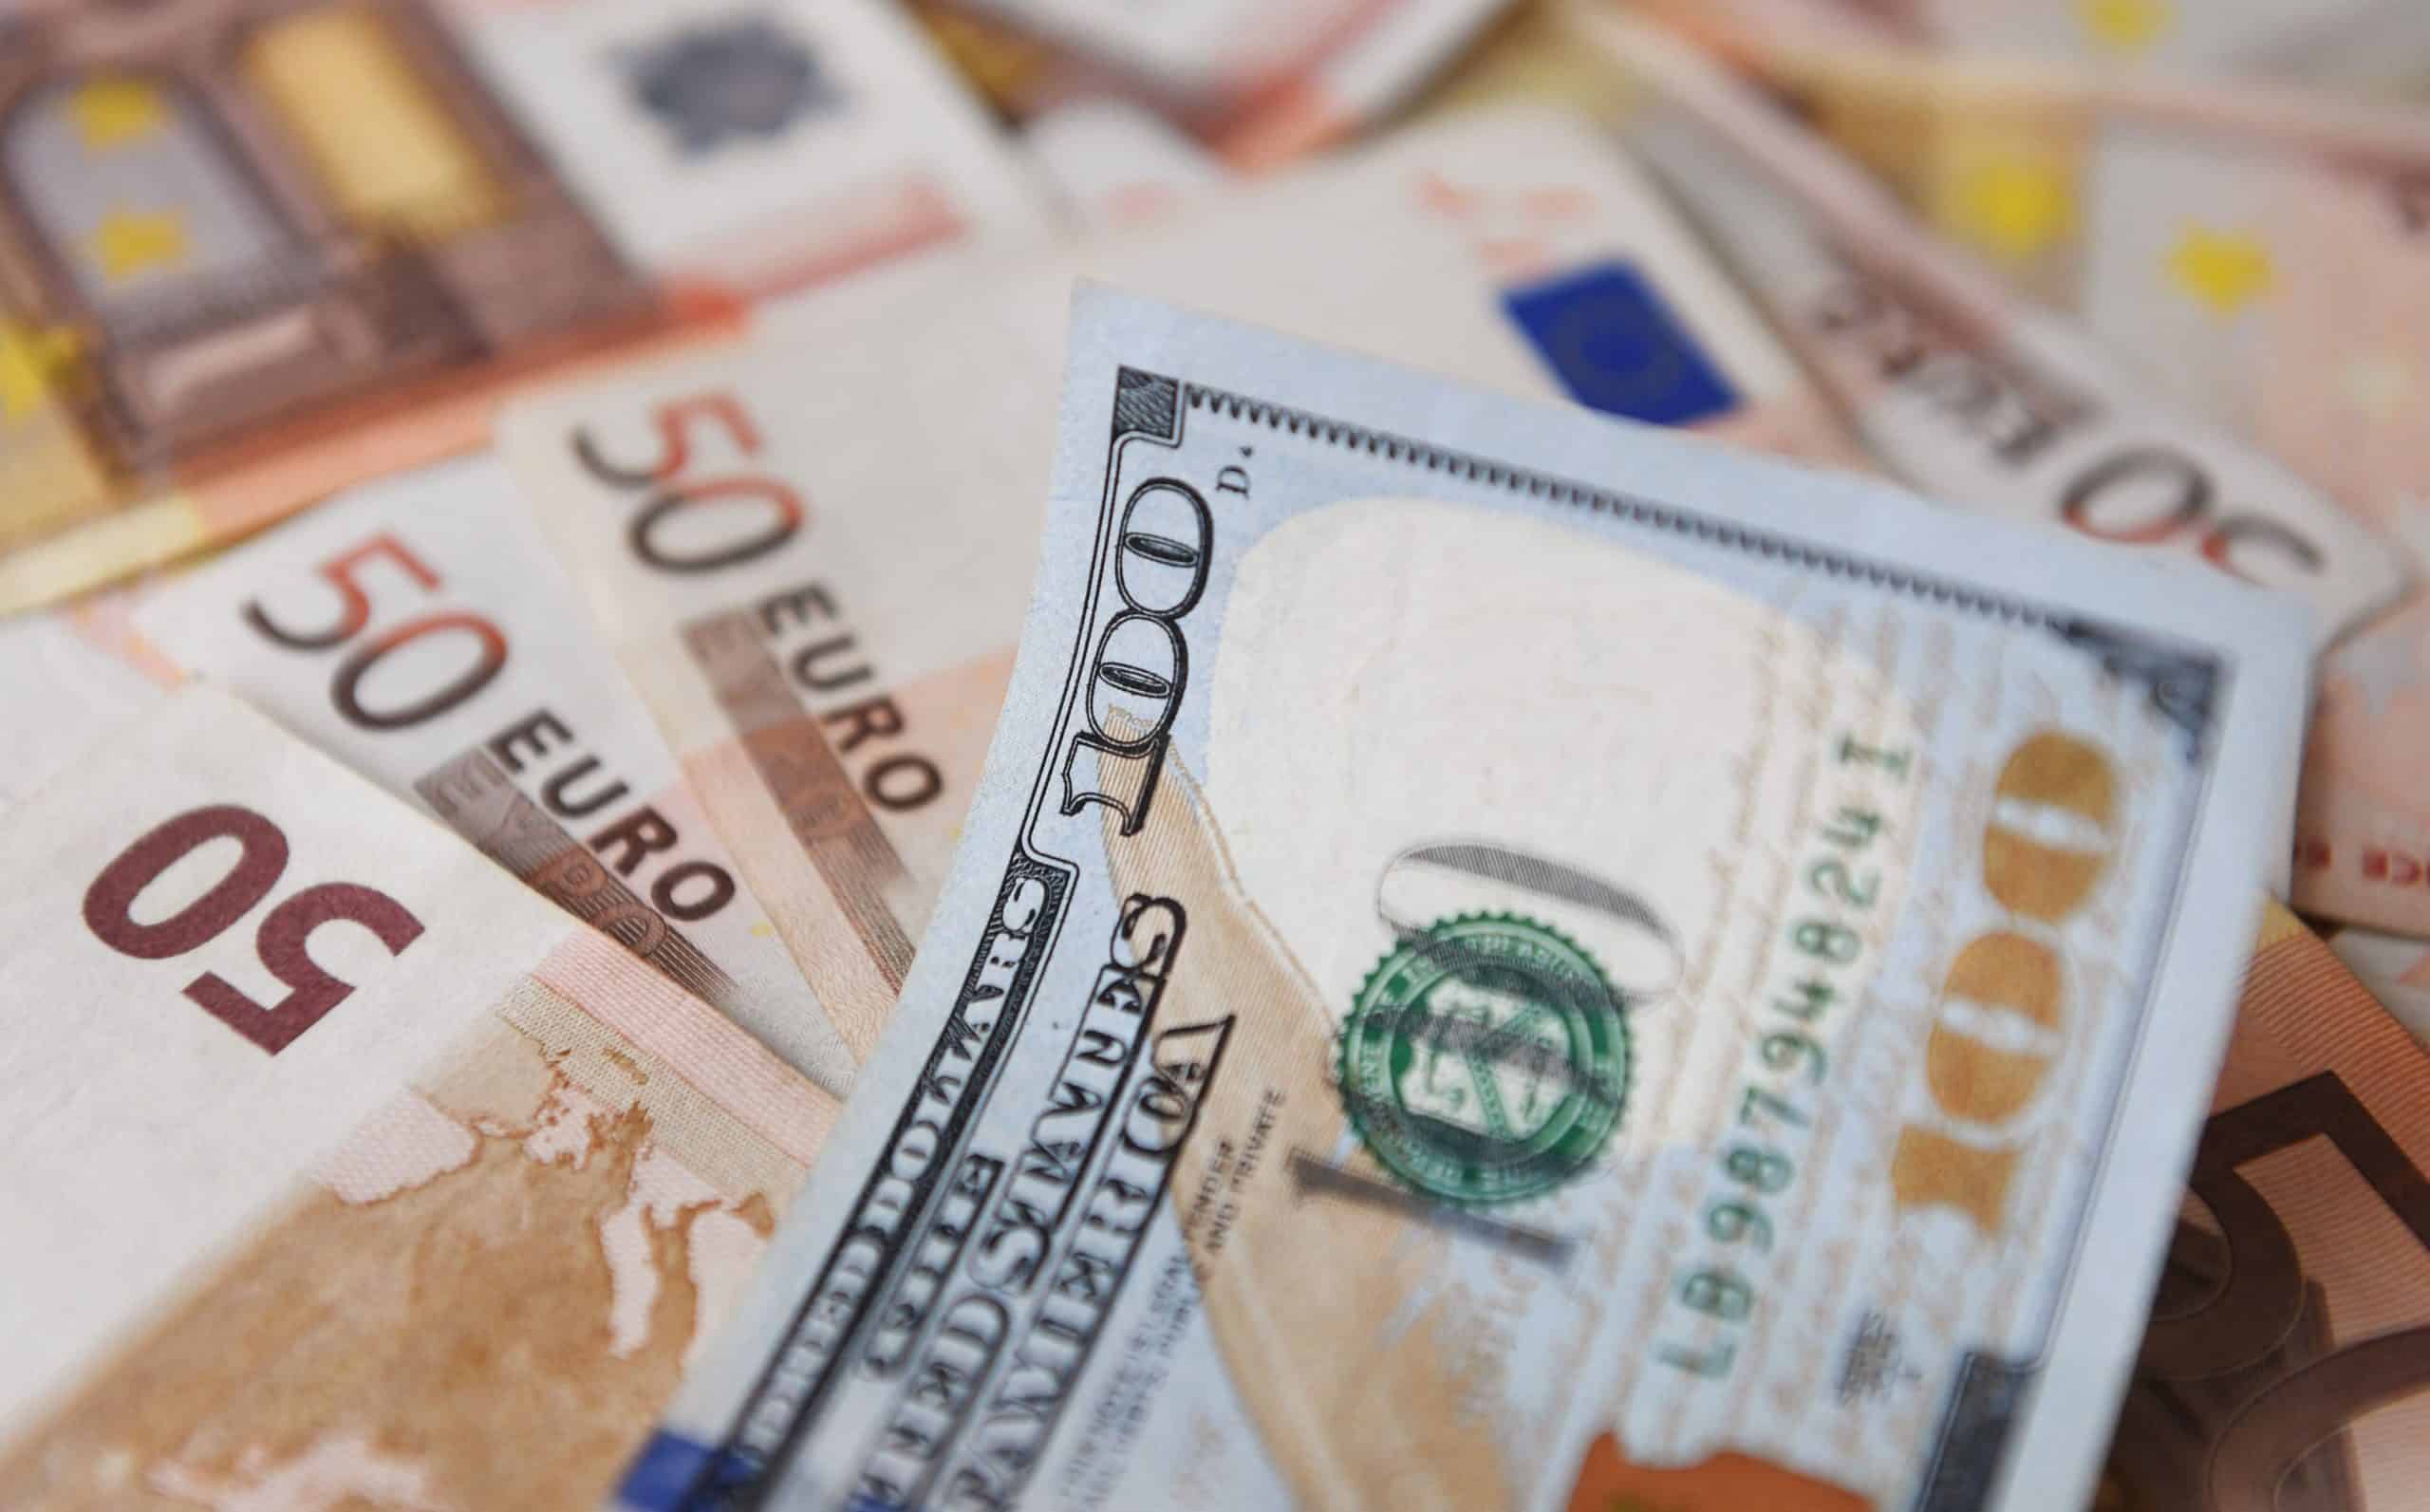 The euro has reached parity with the U.S. dollar